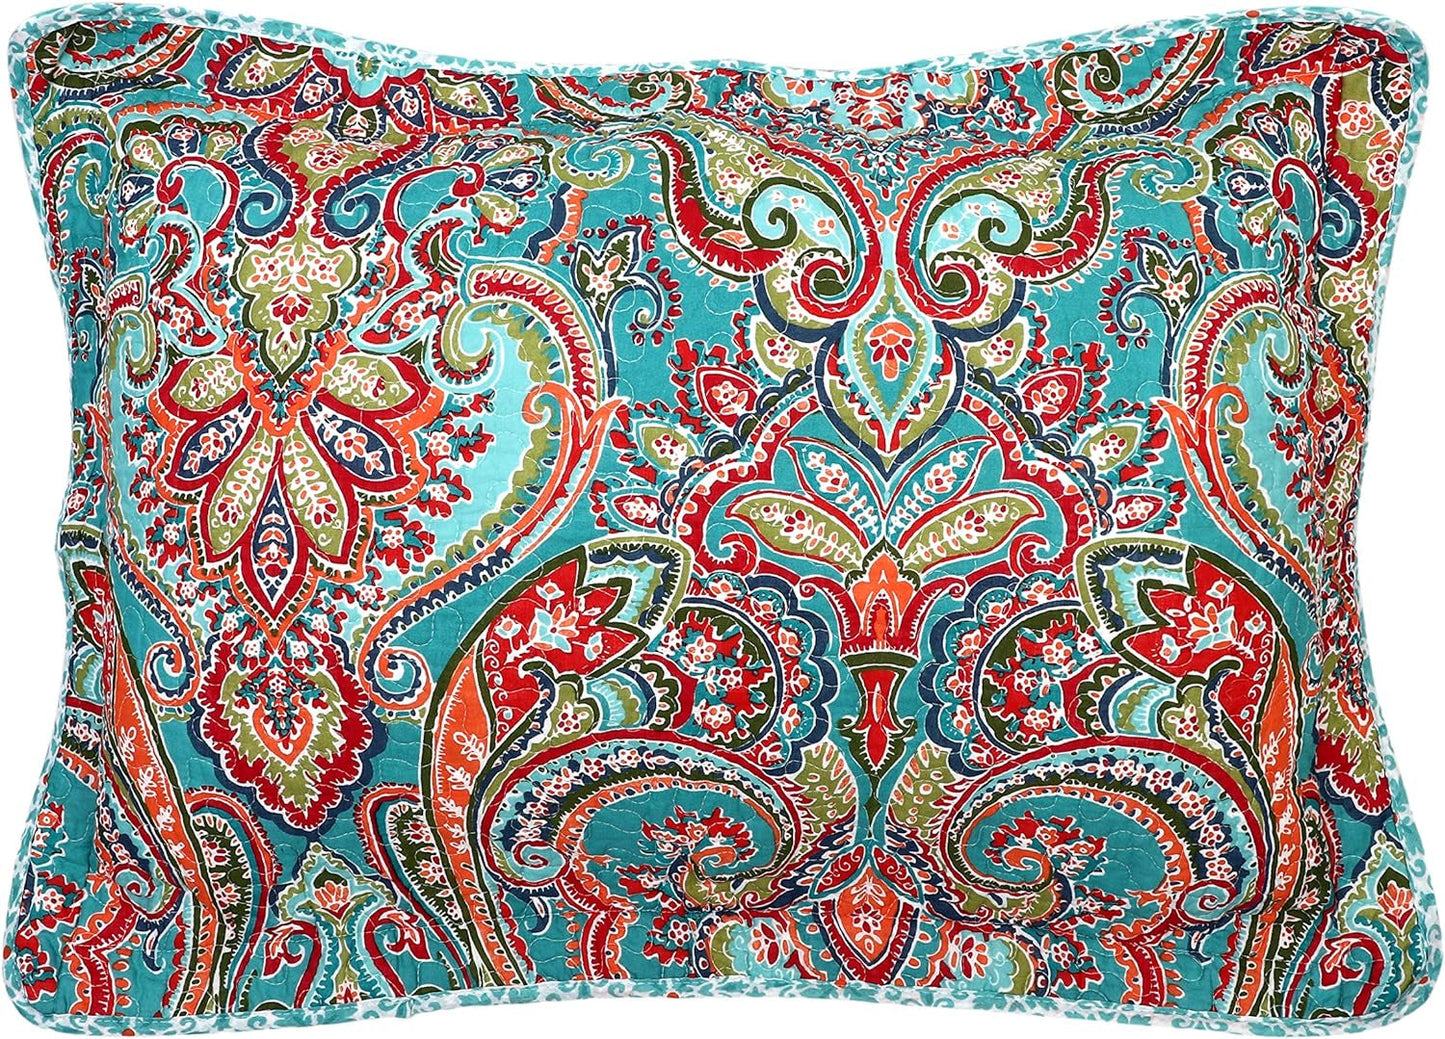 100% Cotton Quilted Pillow Shams Set of 2 Standard Size Boho Pillow Cases Bohemian Pillow Covers (Red)